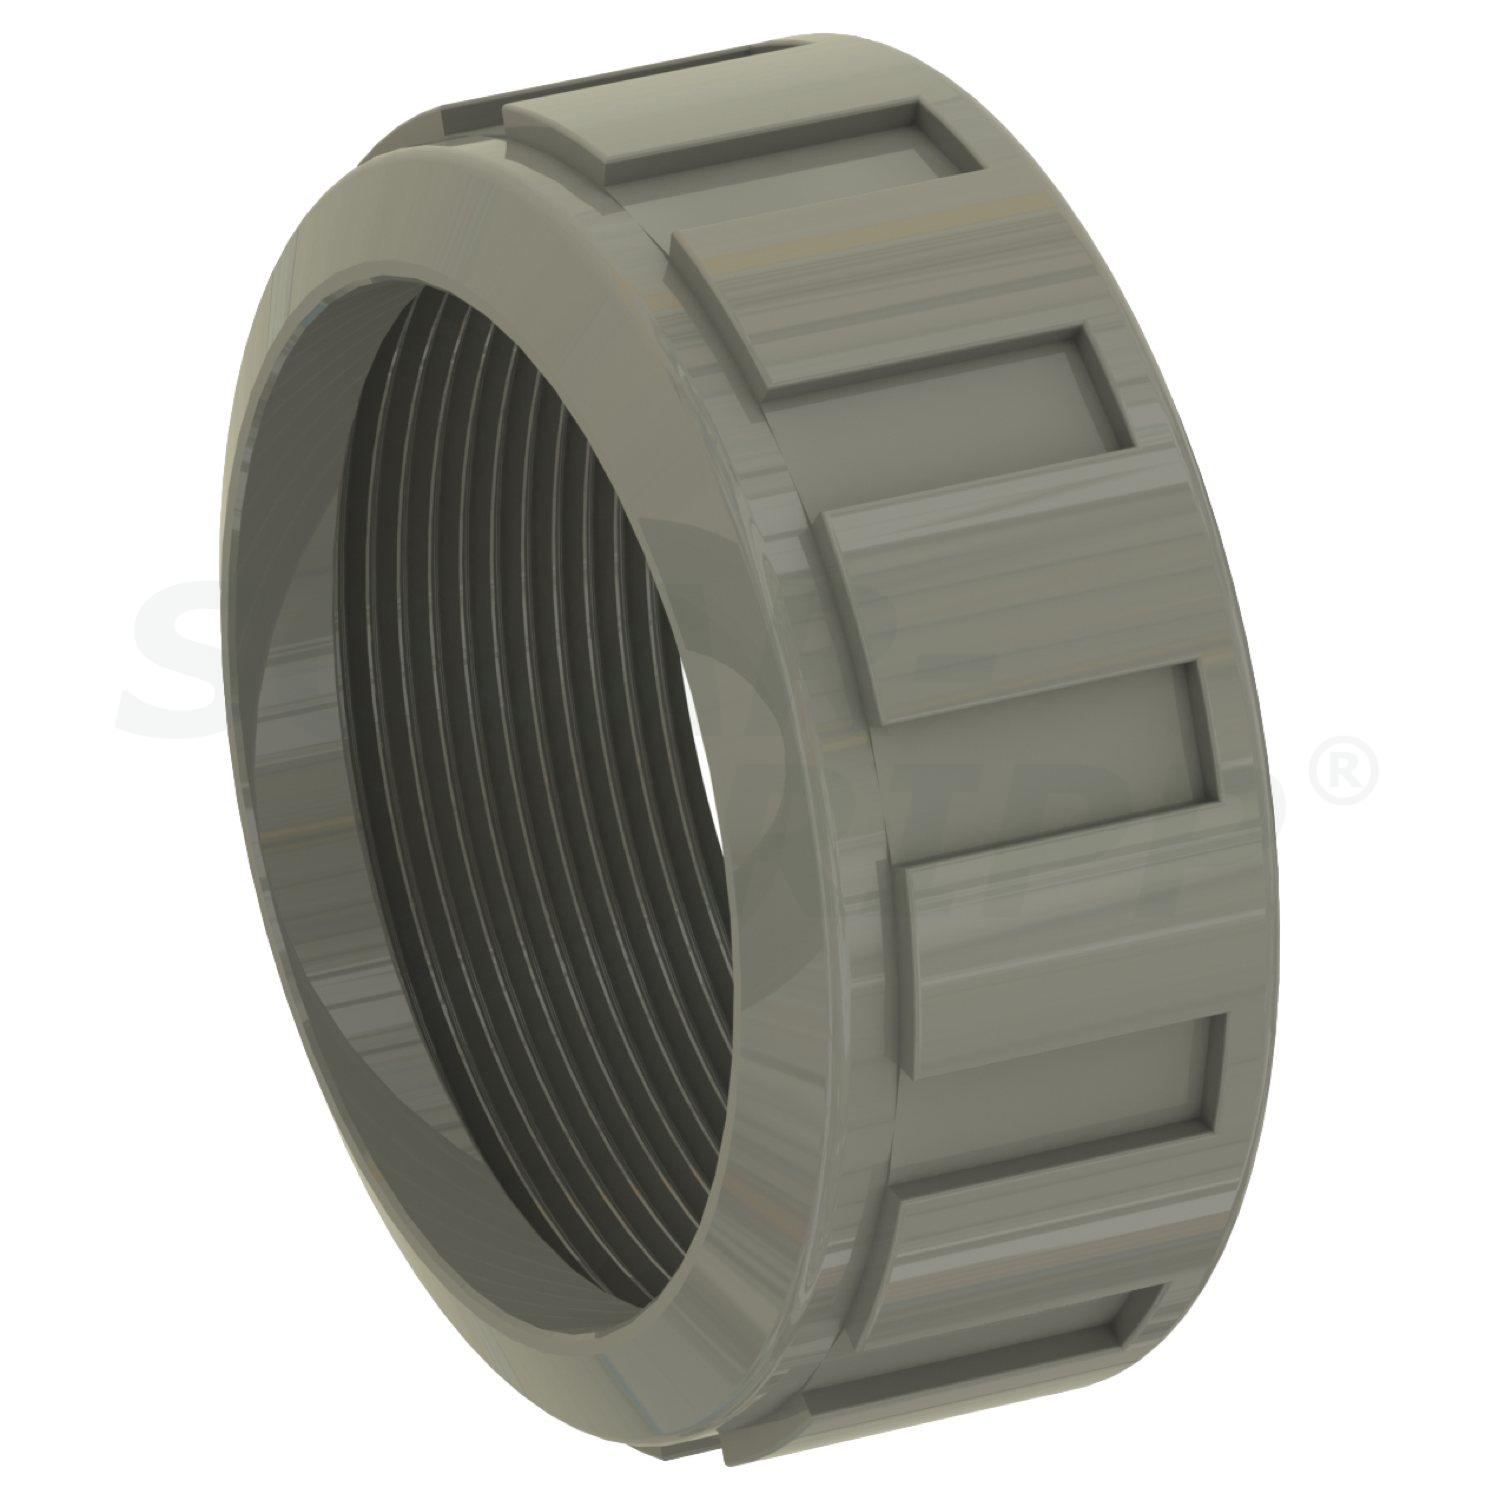 Ring nut for actuated 2 way valve 63mm